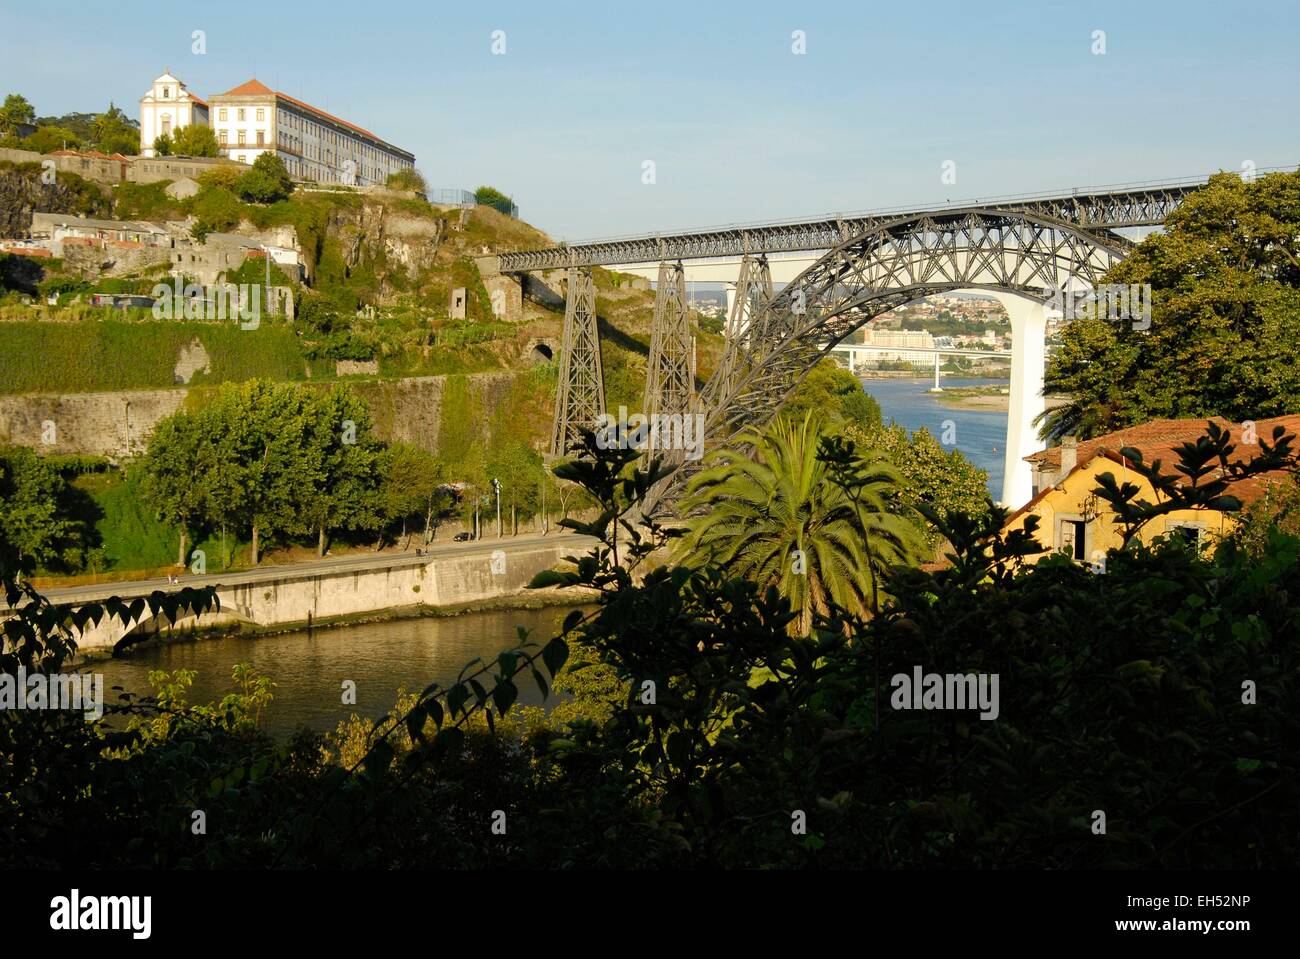 Portugal, North Region, Porto, historical center listed as World Heritage by UNESCO, the Eiffel bridge over the Douro River Stock Photo